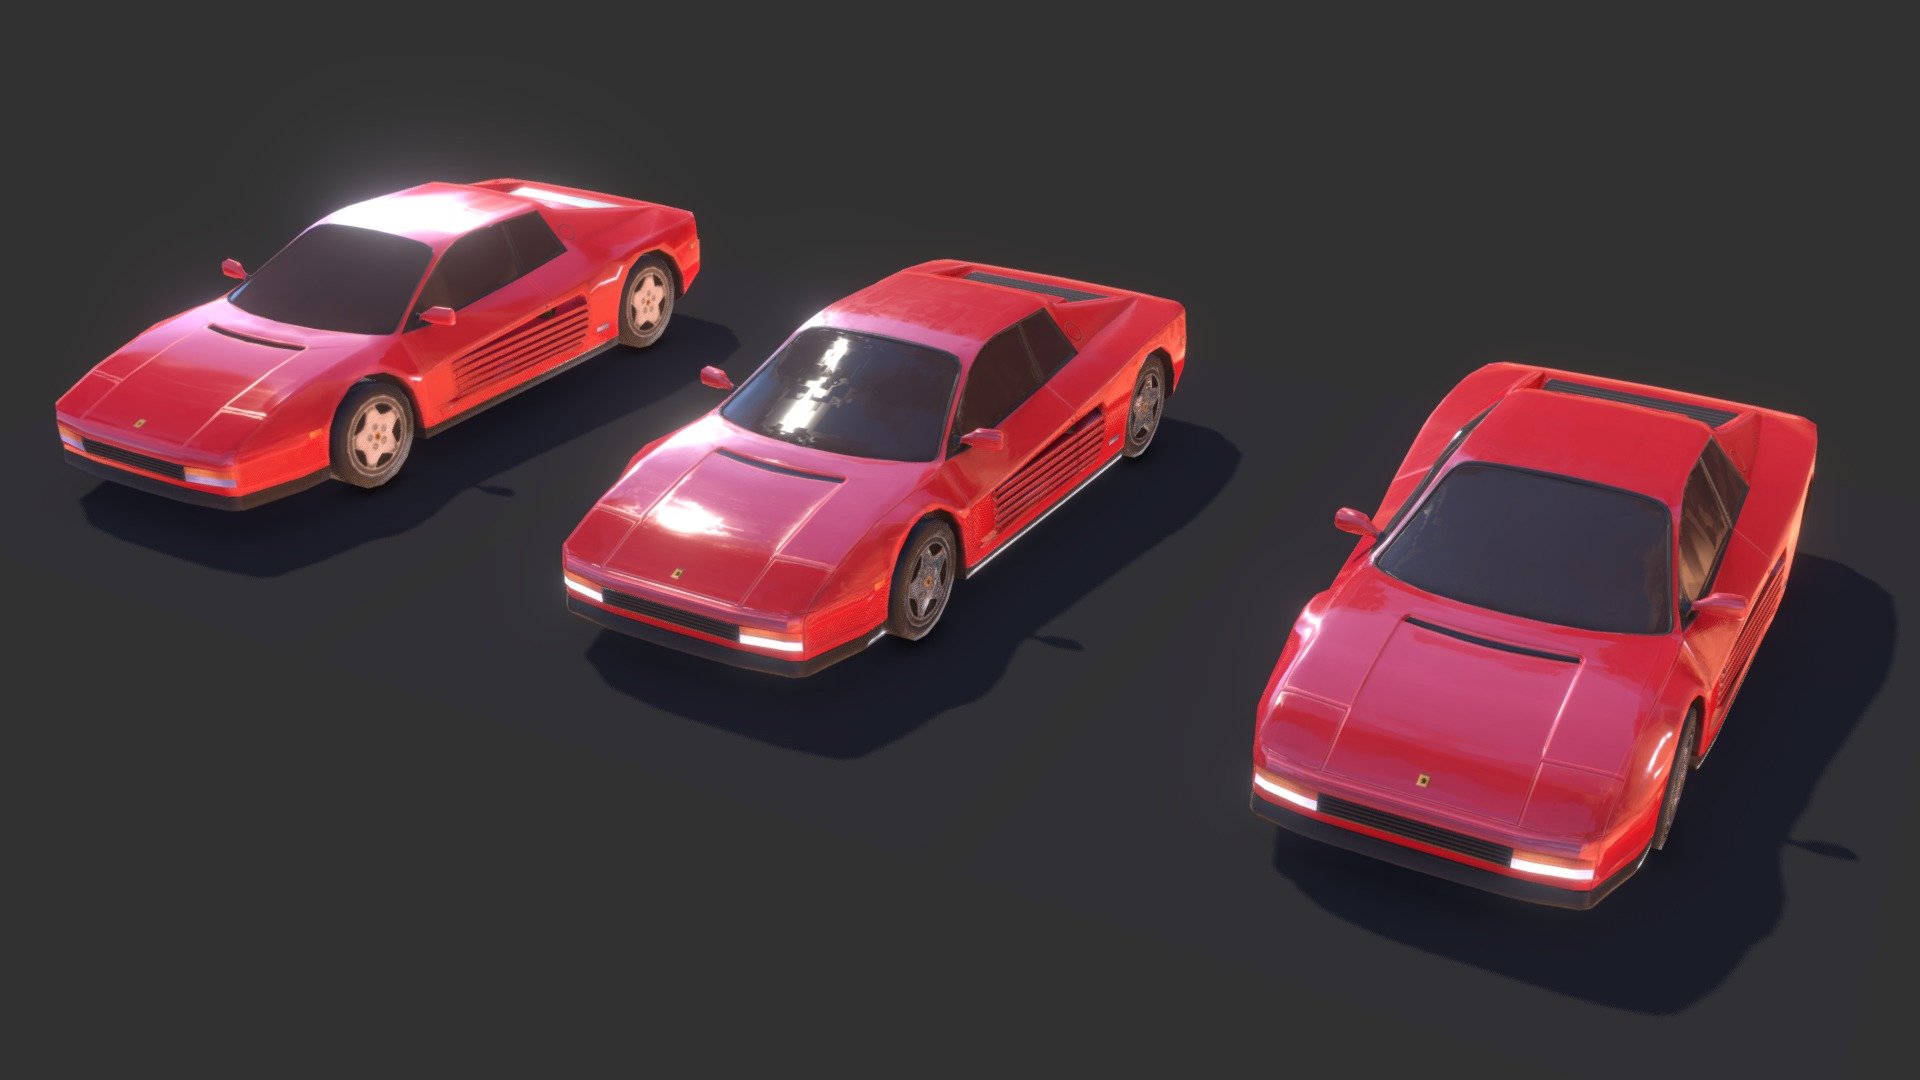 Low-Poly Pack for Retrorunner Testarossa. Inspired by 80s  nostalgia and New Retrowave art and music. Minor tweaks to avoid trademark issues when used in commercial projects.

AAA Quality, Mobile Friendly. Materials &amp; Textures are compatible with PBR and Legacy shading environments. Mobile Version (3504 Tris) shown uses only Color &amp; Specular Textures (512x512) without a Normal Map.




Low-Poly Lod 2: 1 Chasis 4 Wheels (3504 Tris).

Low-Poly Lod 1: 1 Chasis, 4 Wheels (6307 Tris).

PSD &amp; PNG's: Albedo, Normal, Rough, Occlusion &amp; Emissives

Includes 2K, 1024 &amp; 512 (Mobile) resolutions.

Includes Shadow Plane with Material &amp; Textures.

Asset is composed of Chasis with 4 Wheels with 1 Material.

Wheels are placed with correct pivots.

Emissives are shown.

2K Textures &amp; .blend files included.

Alt Colors (White, Blue, Black, Teal) are being packaged for future updates. Please leave preferences in comments. 

Also Available: Mid-High Poly Version (10k Tris) - Retrorunner Testarossa Low-Poly Pack - Buy Royalty Free 3D model by Mega Blaster Systems (@megablastersystems) 3d model